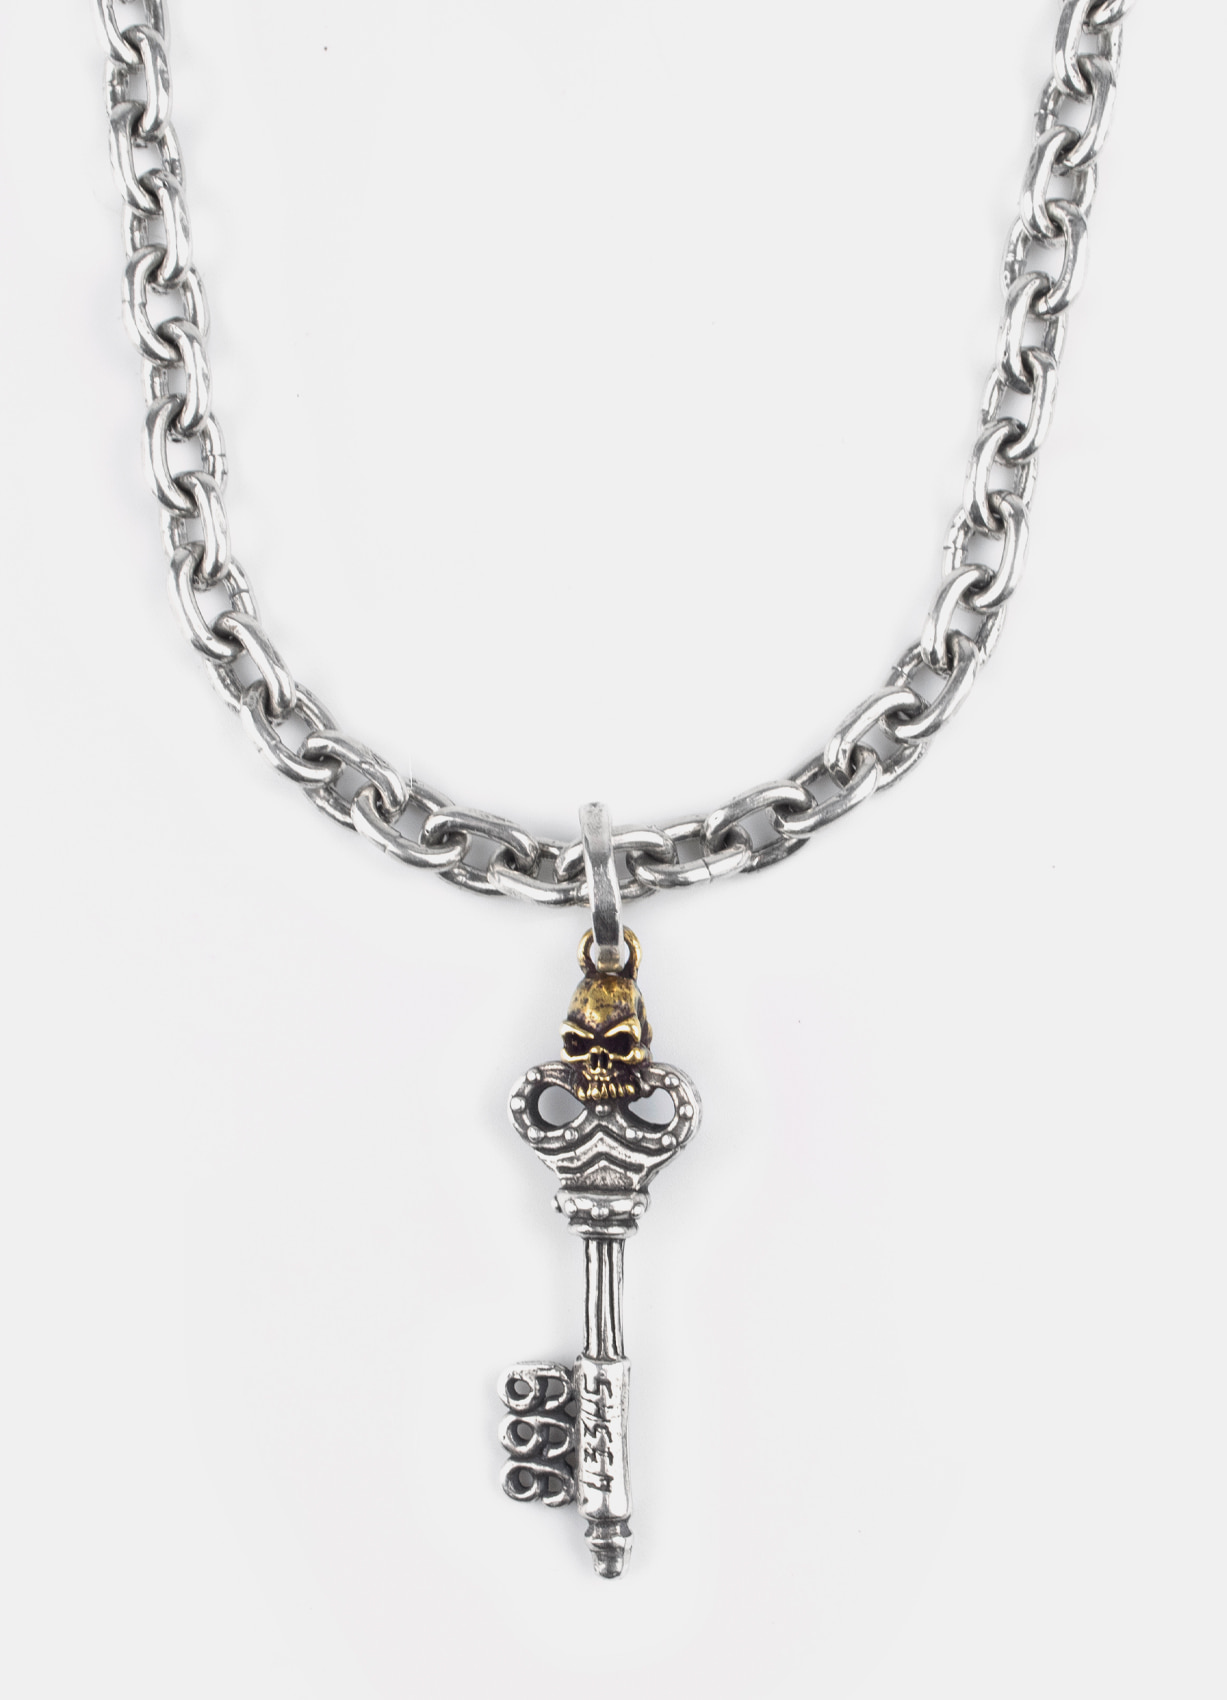 Key Pendant with 577 Link Necklace Set